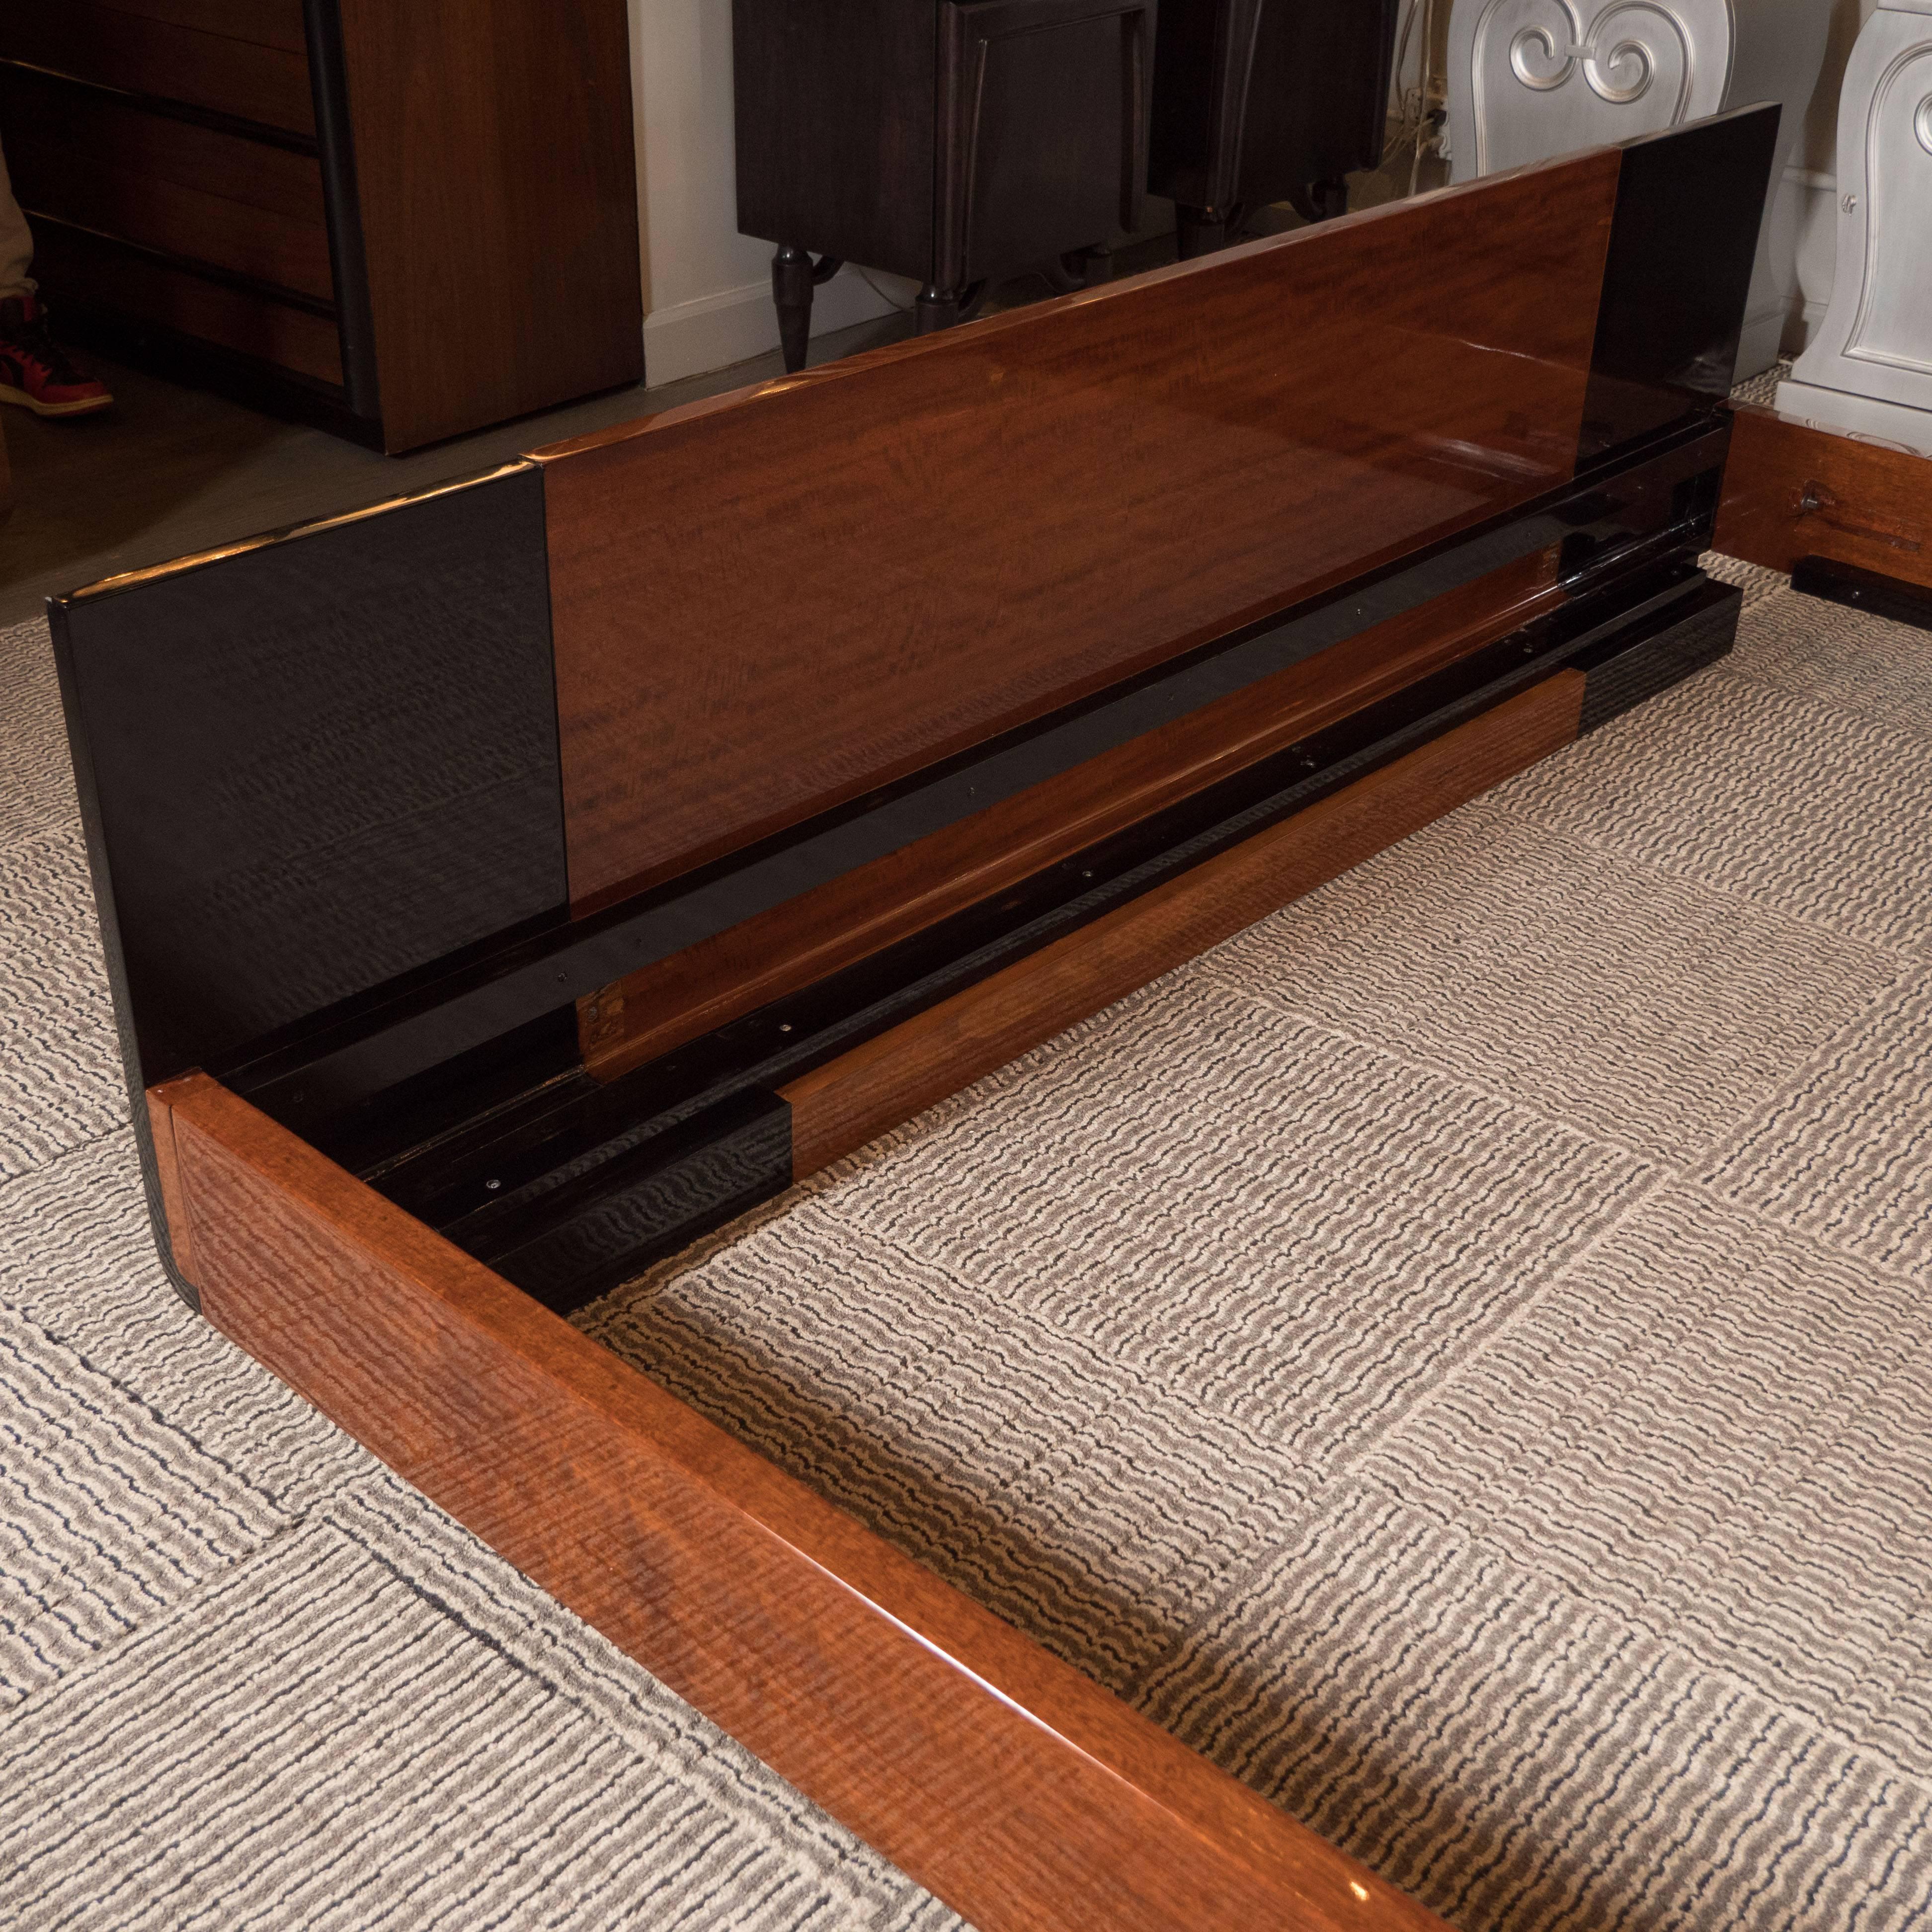 Mid-20th Century King Size Bed in Black Lacquer and Bookmatched Burled Walnut by Donald Deskey